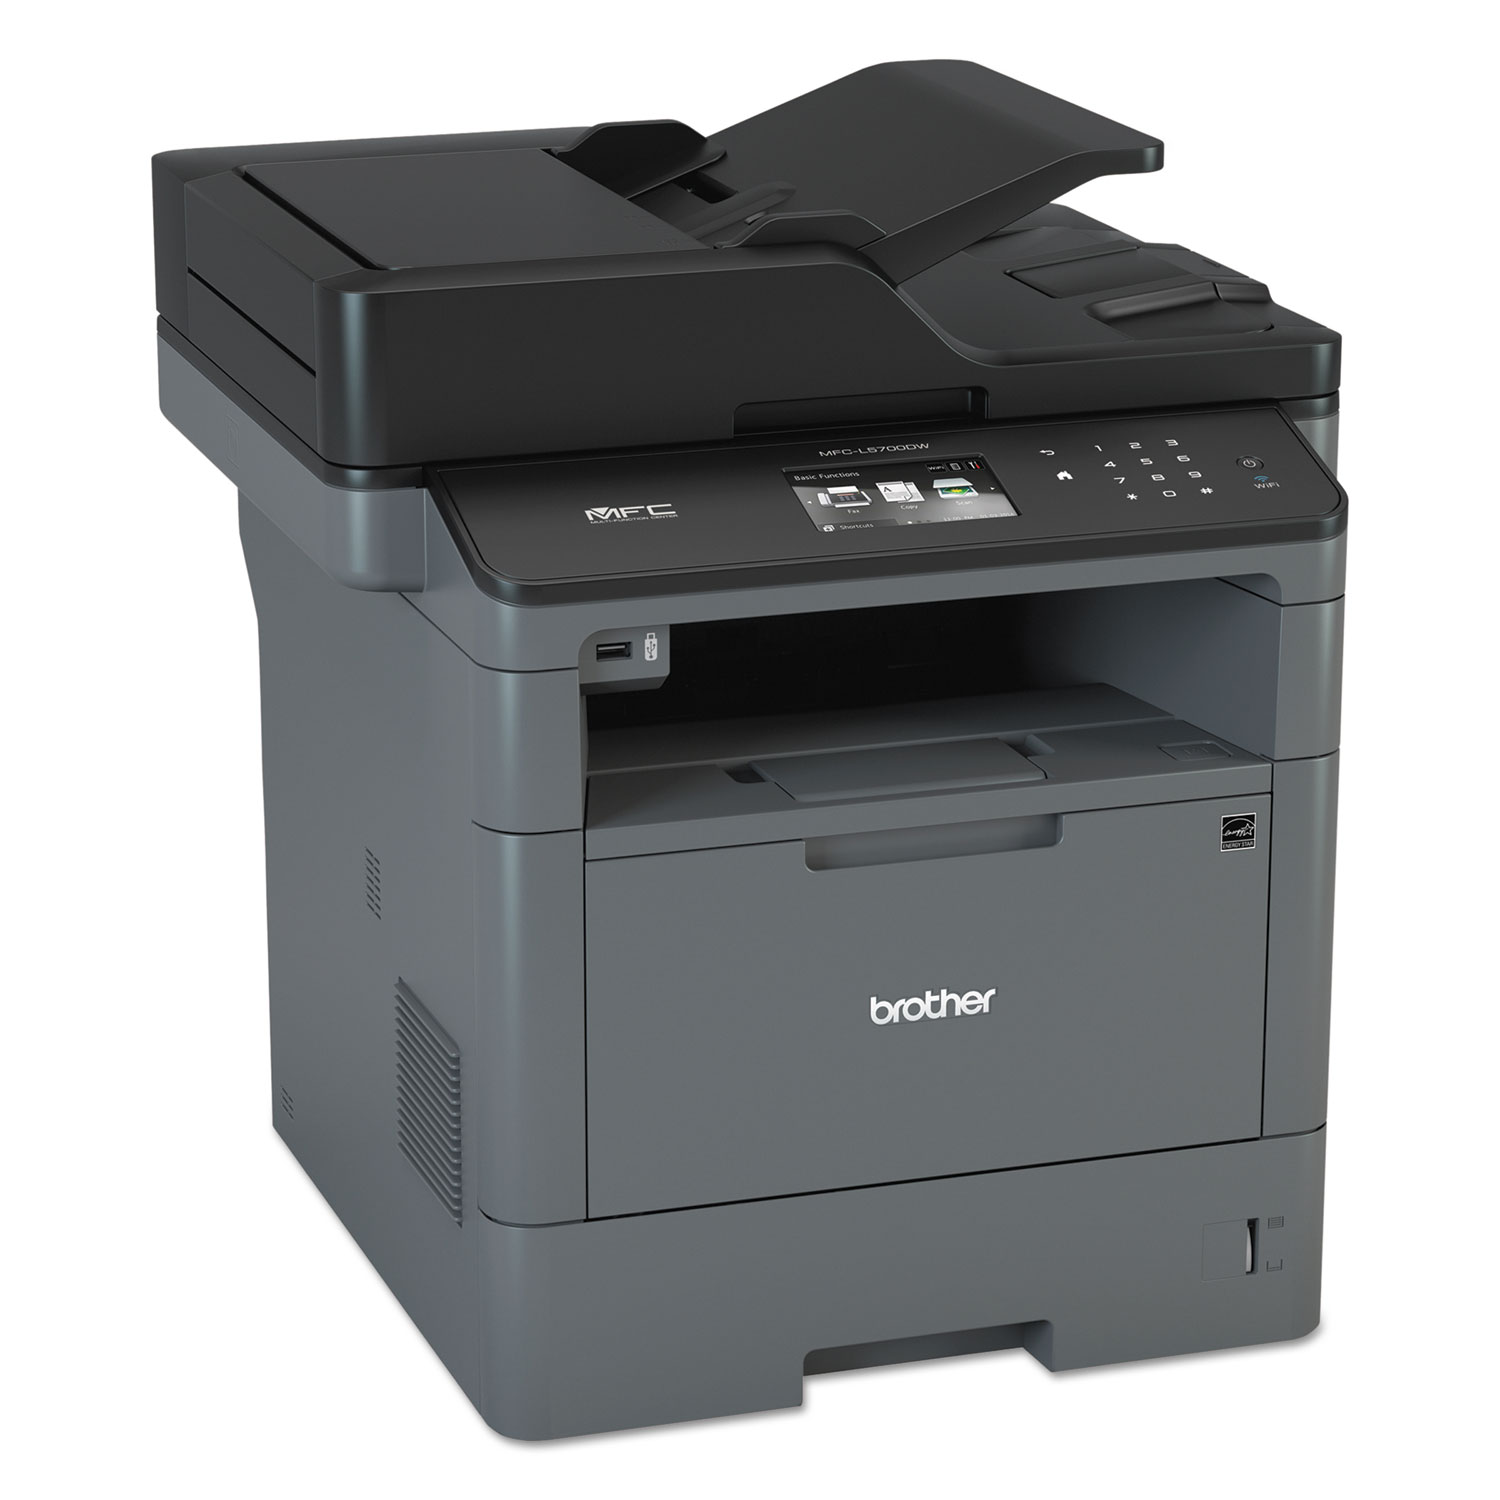 MFC-L5700DW Business Laser Wireless All-in-One, Copy/Fax/Print/Scan